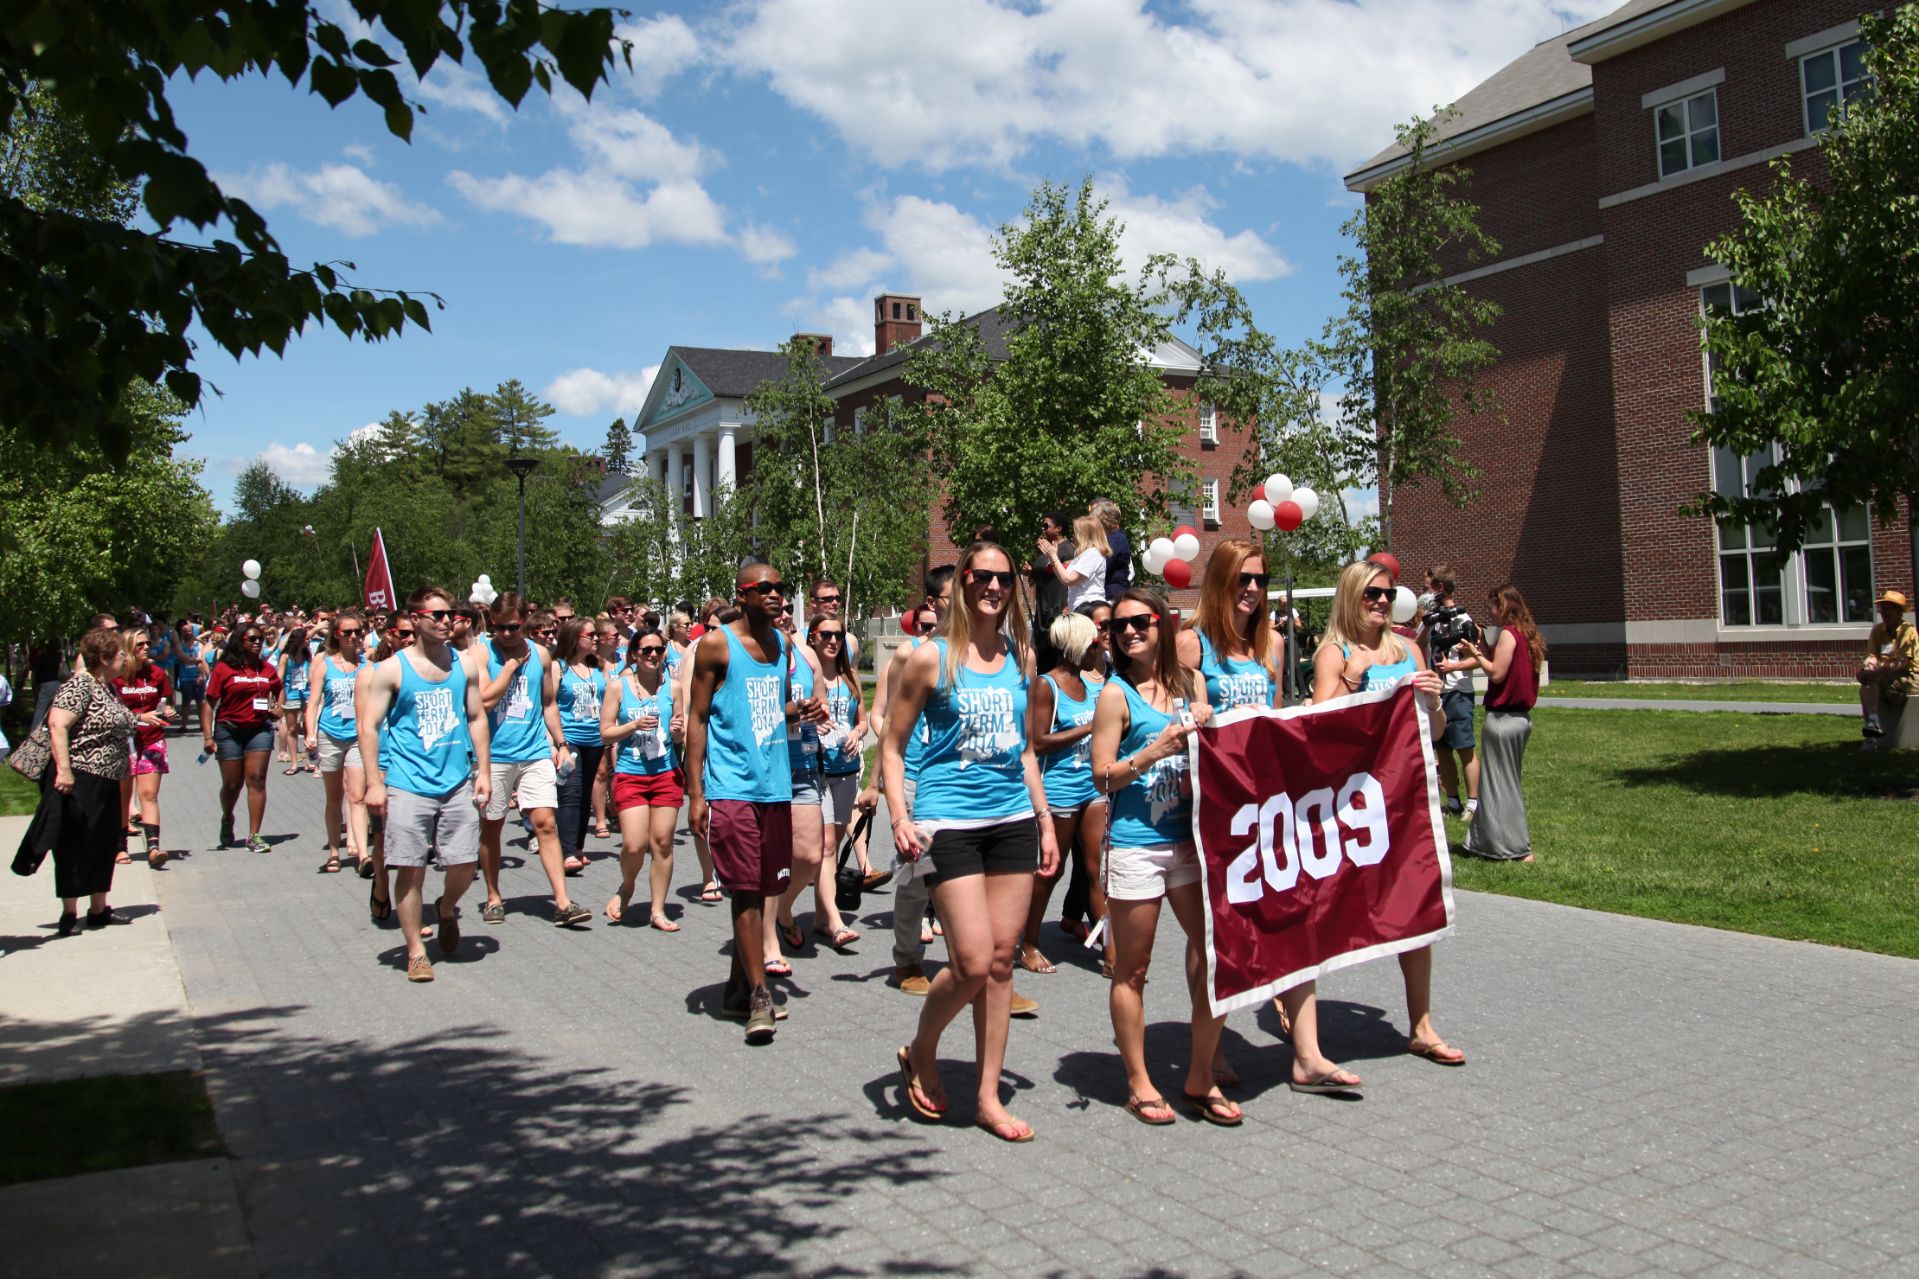 The Schuler Initiative will help Bates better engage with millennial alumni, roughly corresponding to the classes of 2002 to 2017. Here, members of the Class of 2009 march in the Reunion Alumni Parade on June 7, 2014. (Jay Burns for Bates College